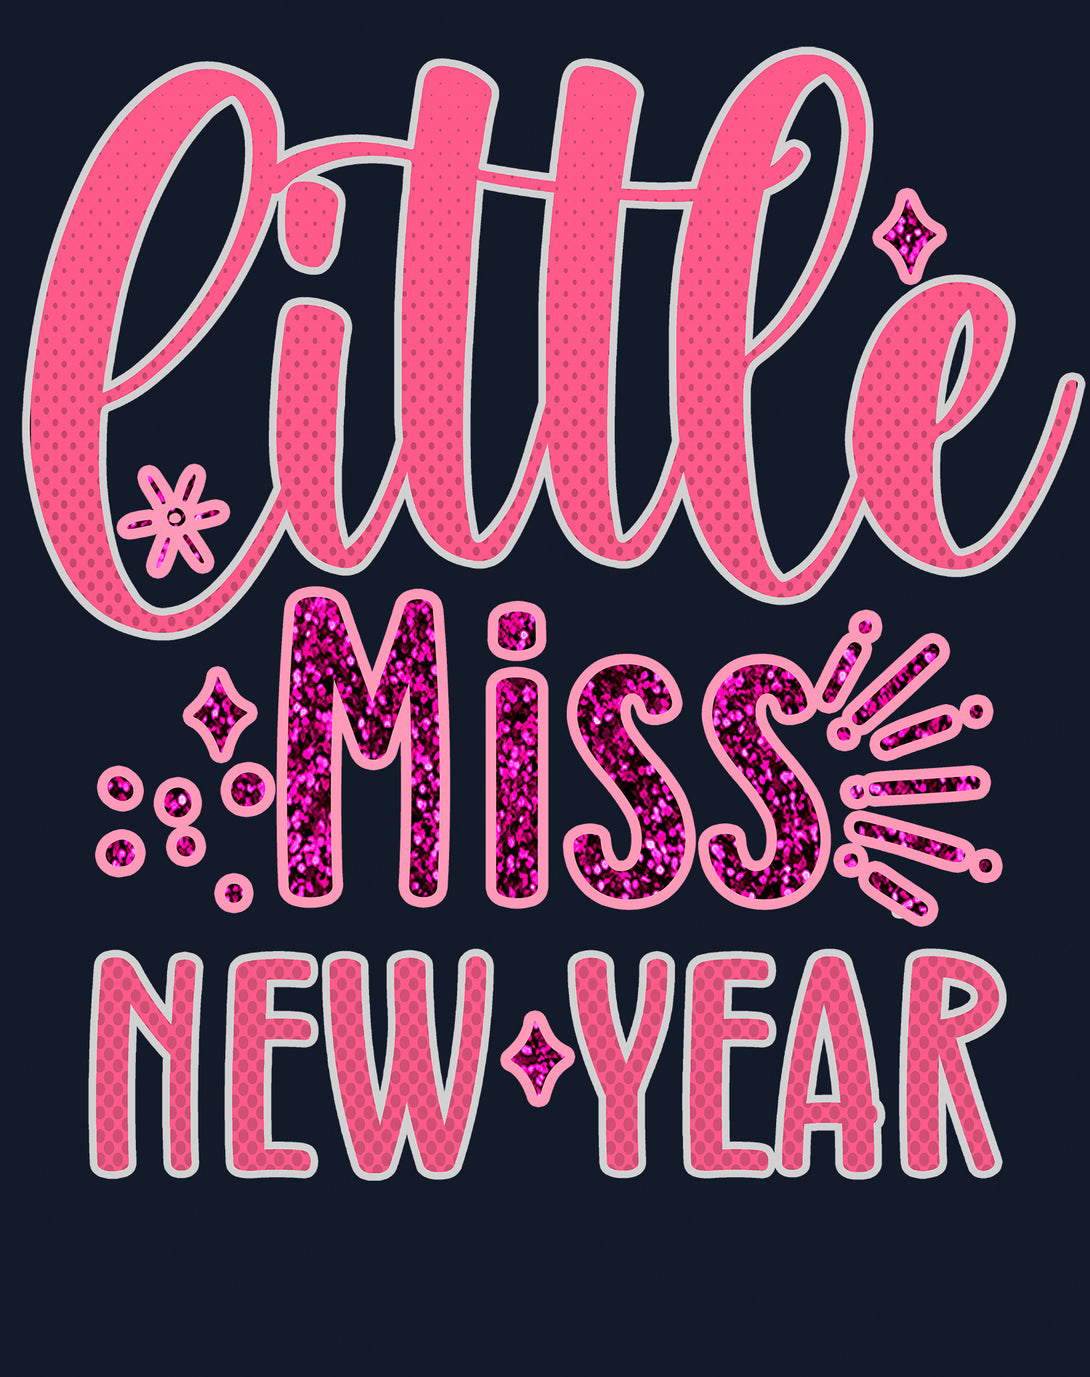 NYE Little Miss New Year Sparkle Bling Party Eve Celebration Women's T-Shirt Navy - Urban Species Design Close Up